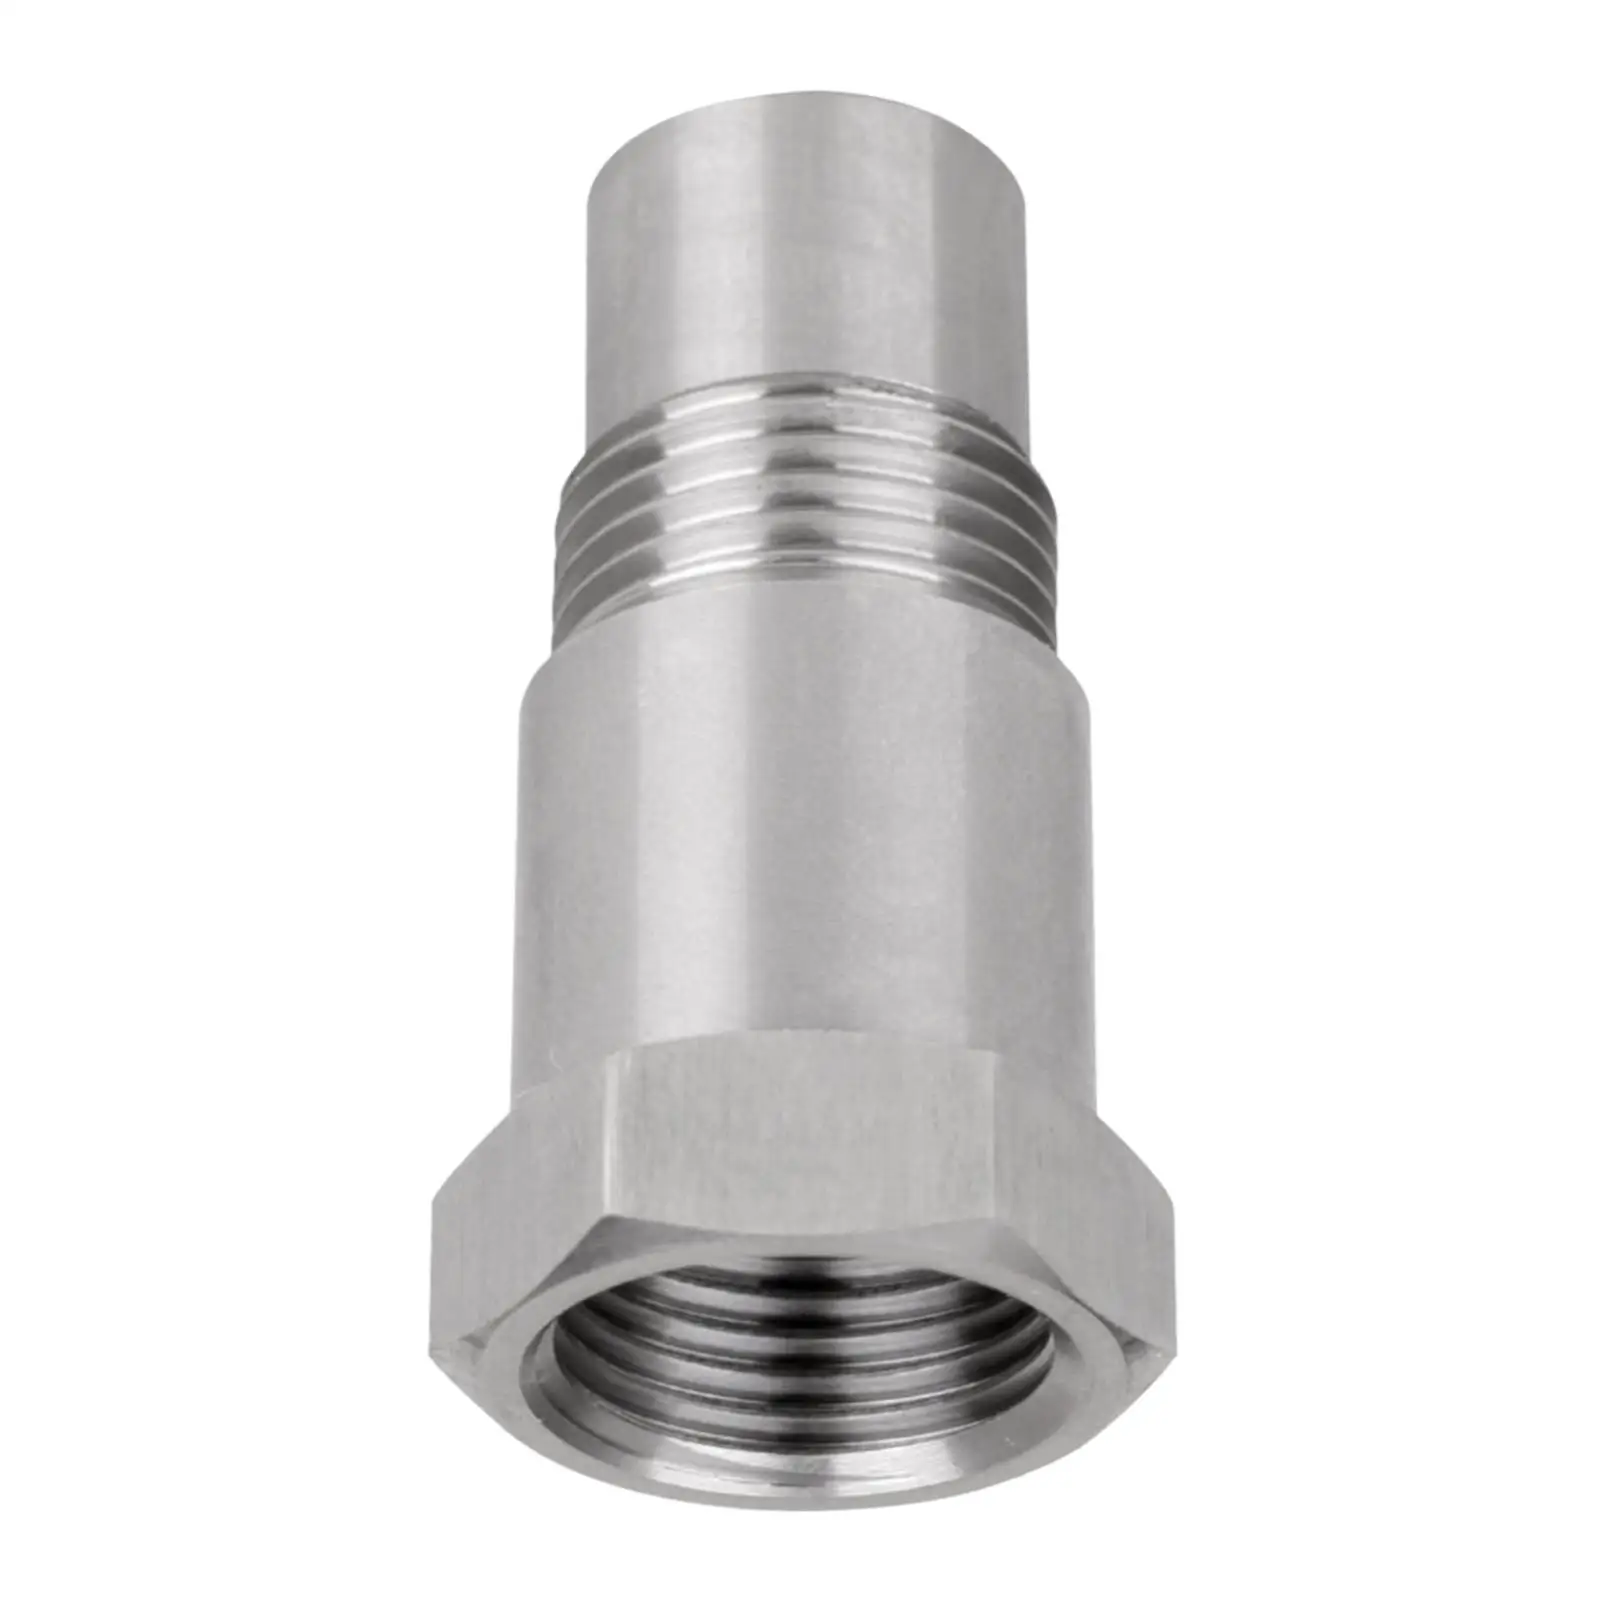 O2 Sensor Adapter Spacer Extender Stainless Steel M18x1.5 Accessory Length 46.5mm